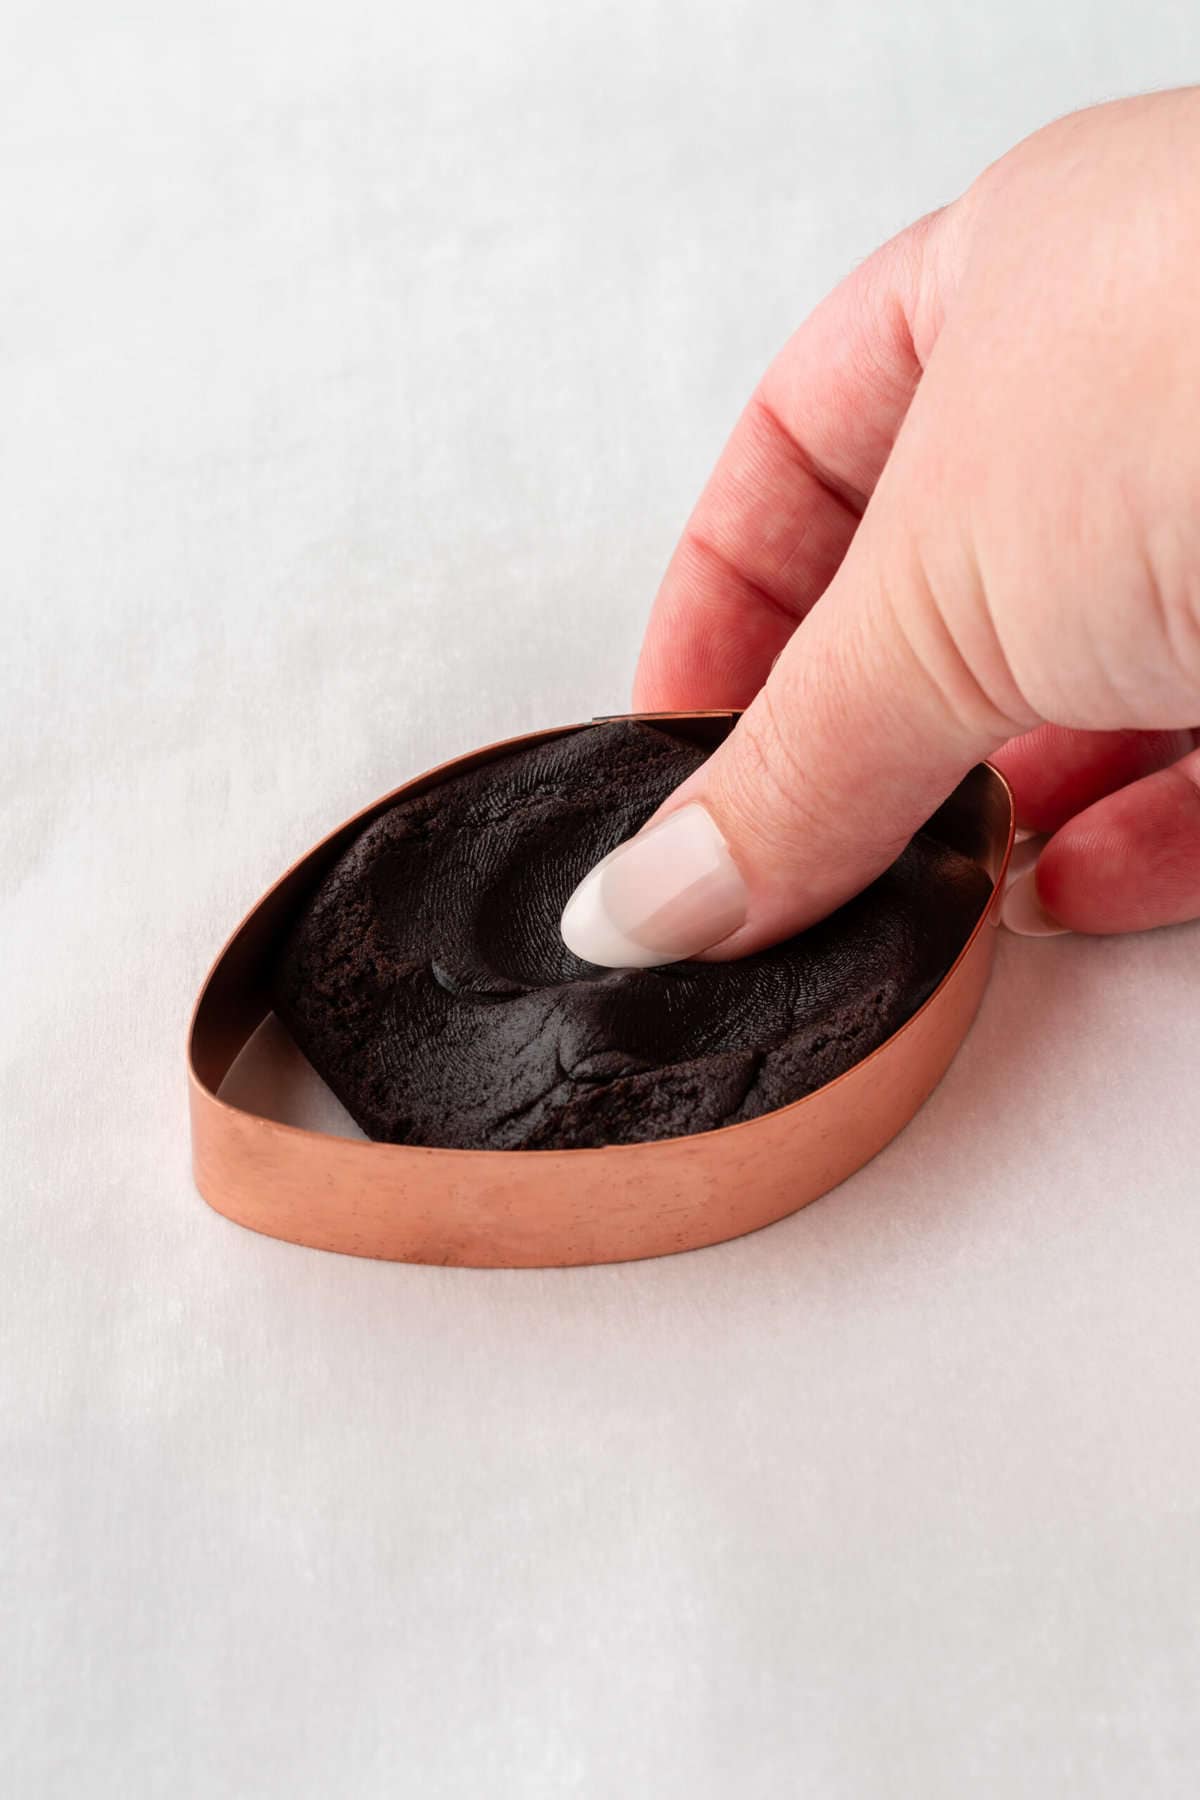 pressing dough into football cookie cutter